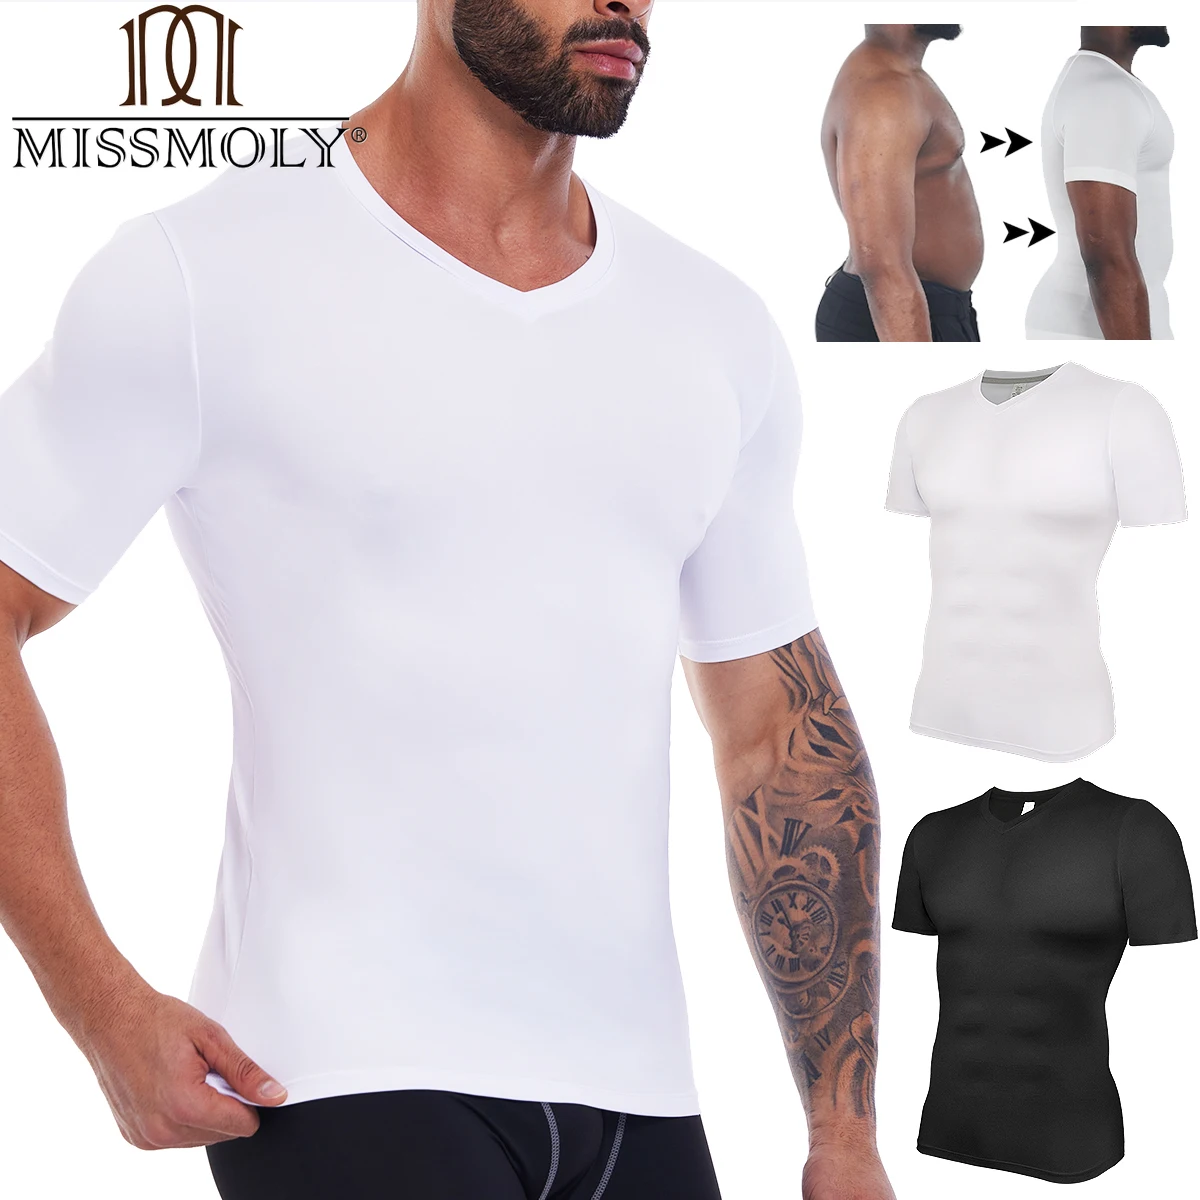 Mens Body Shaper Waist Trainer Compression Shirts V-Neck Short Sleeved Slimming Undershirt Workout Abs Abdomen Tight Corset Tops men gynecomastia compression tank top waist trainer belt slimming sheath 4 rows of hook shapewear vest tight fitting shirts band